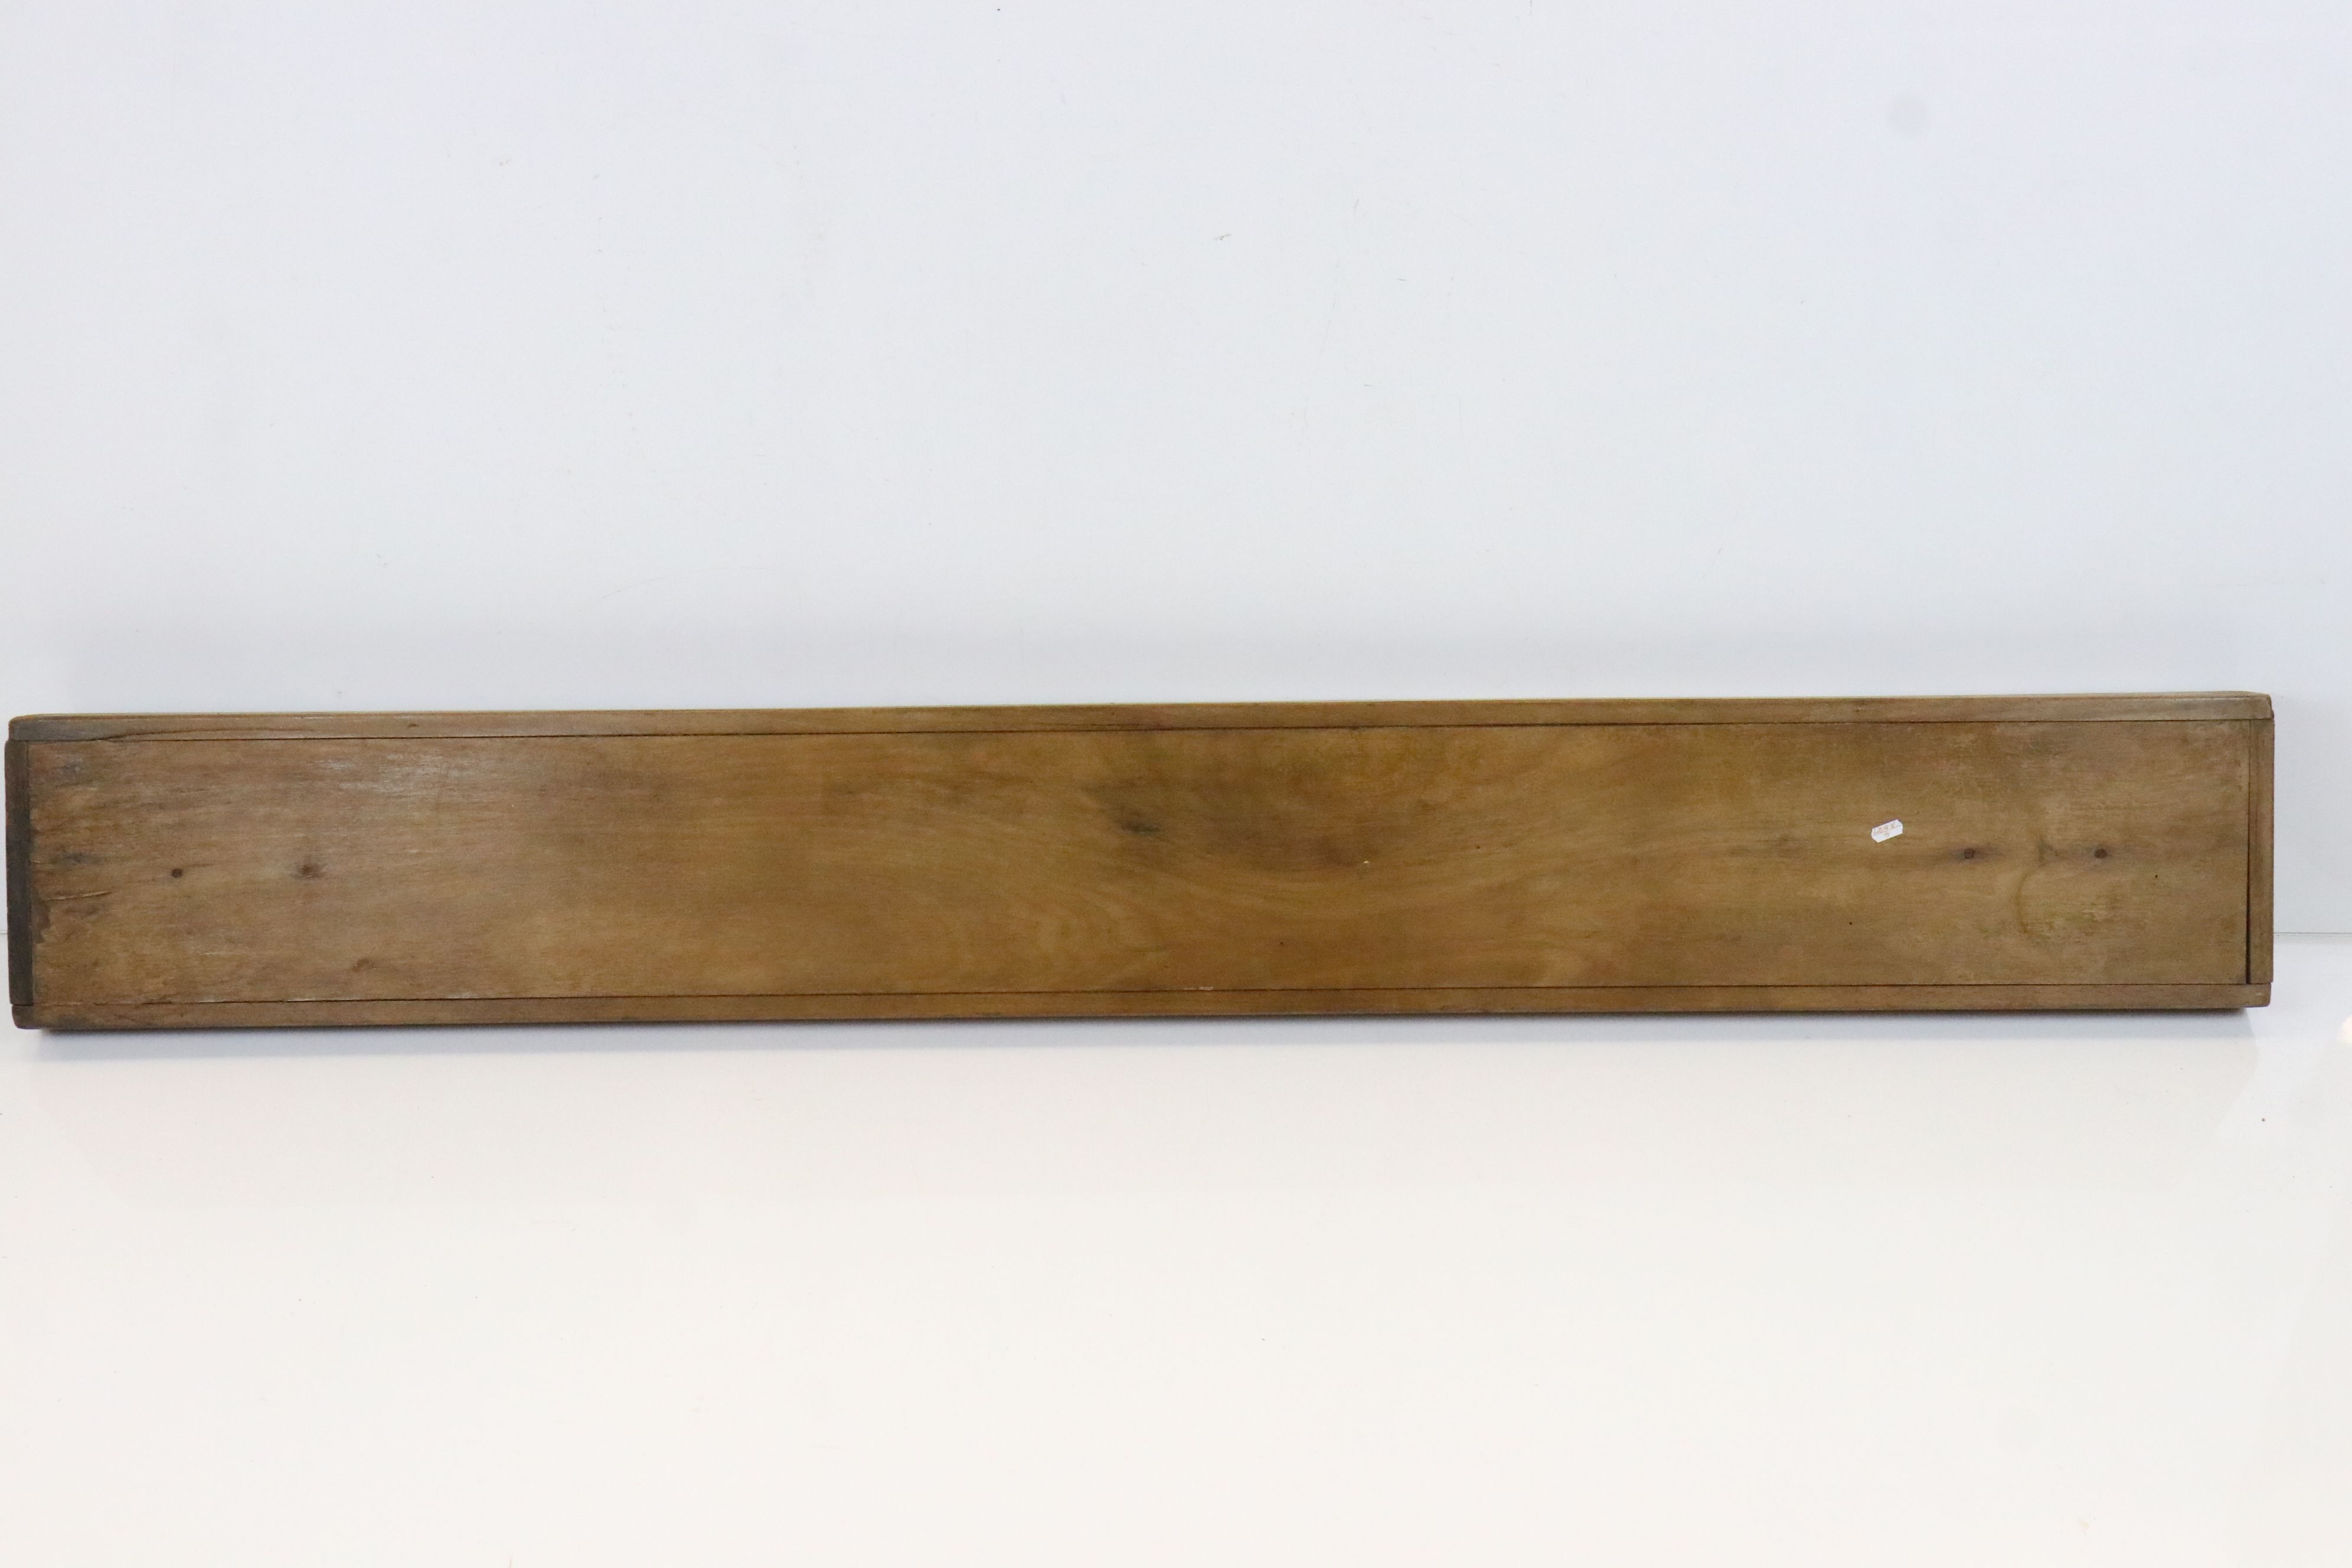 Pine folding bench, approx. 6' long - Image 6 of 6